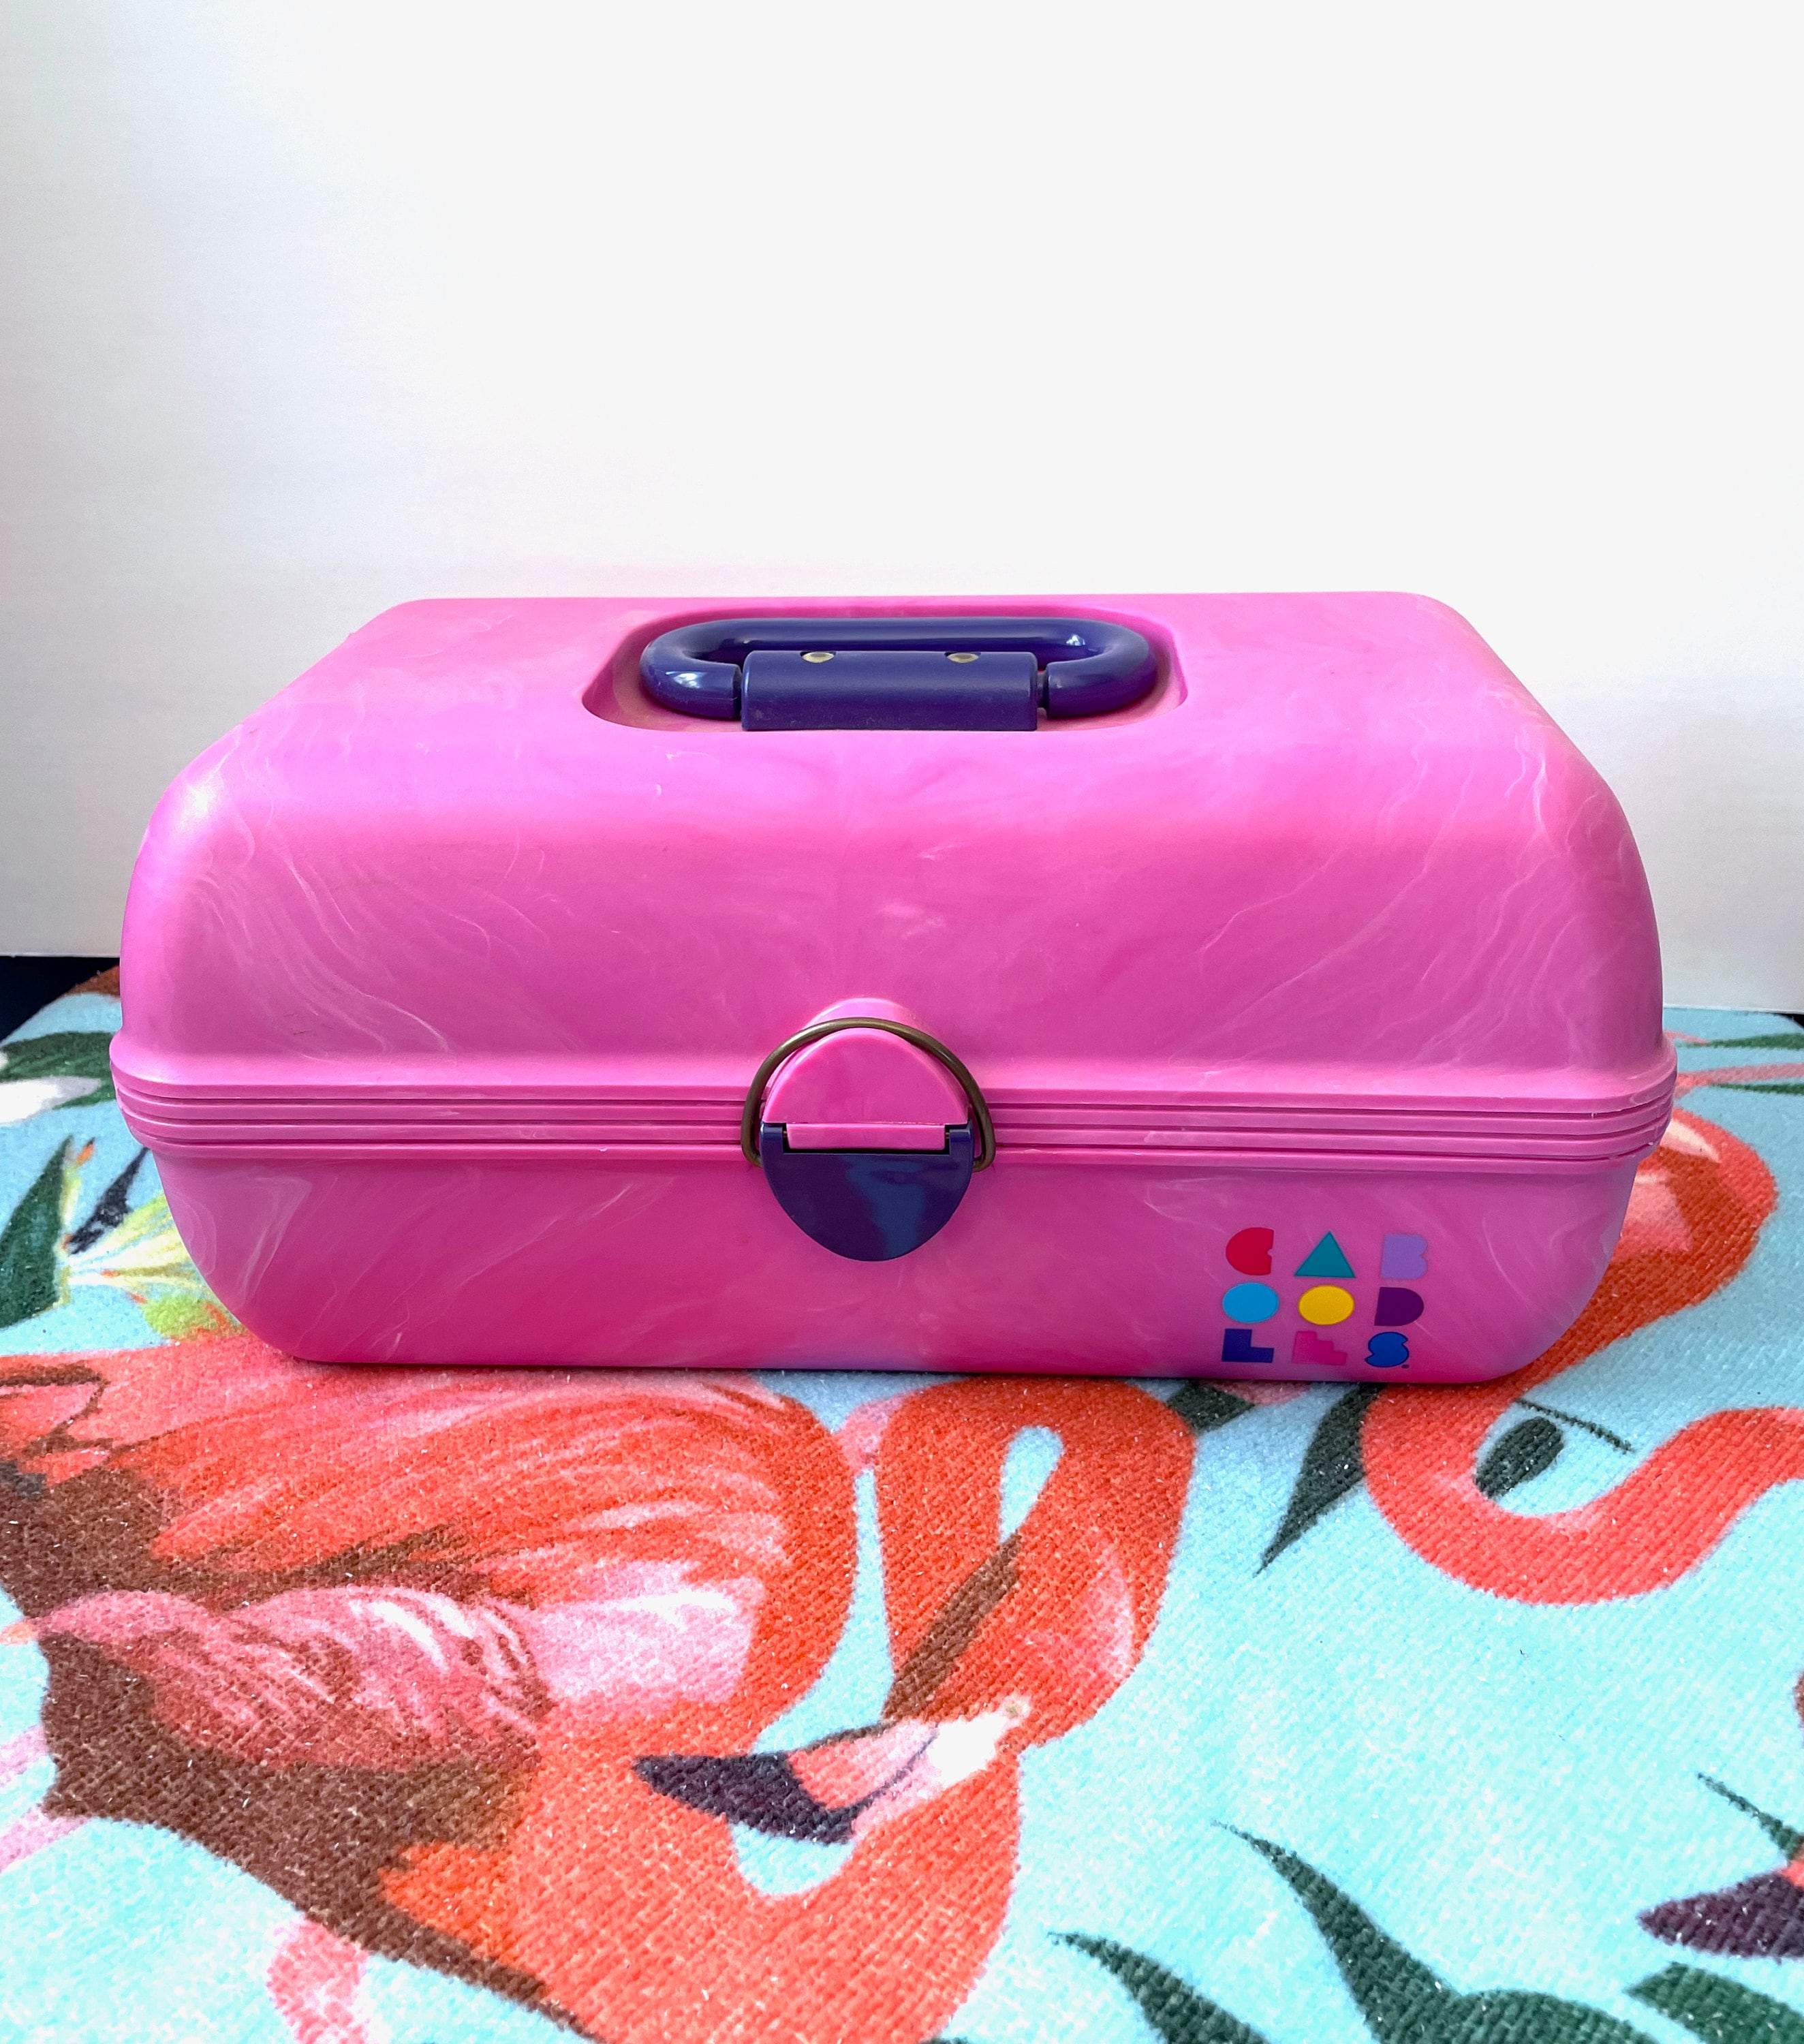 HOT* Caboodles Beauty Box + 58-Piece Cosmetics Kit from Ulta for